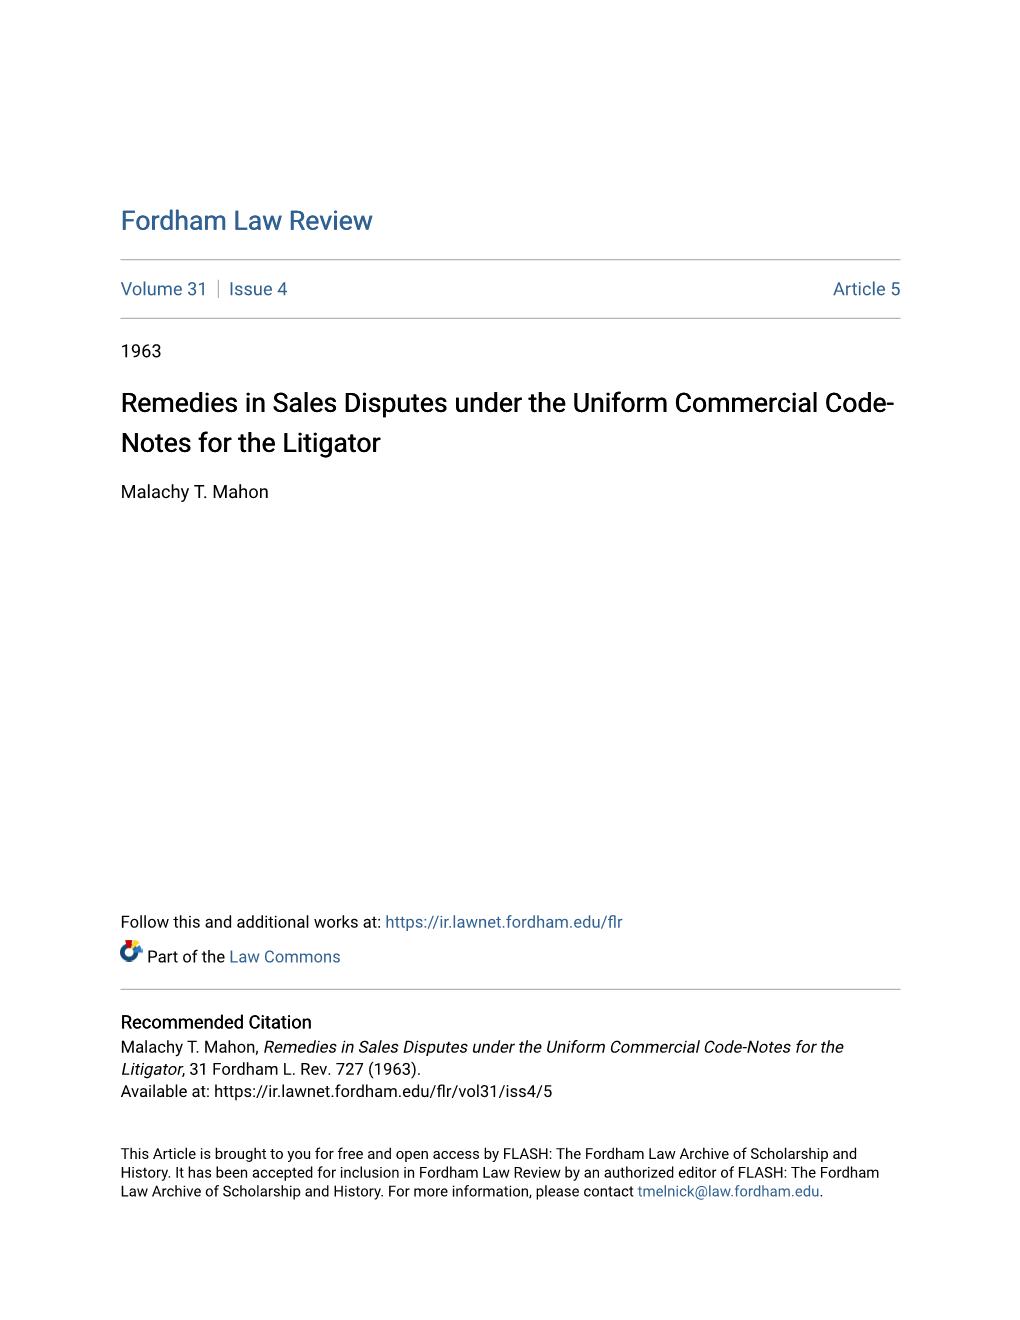 Remedies in Sales Disputes Under the Uniform Commercial Code-Notes for the Litigator, 31 Fordham L